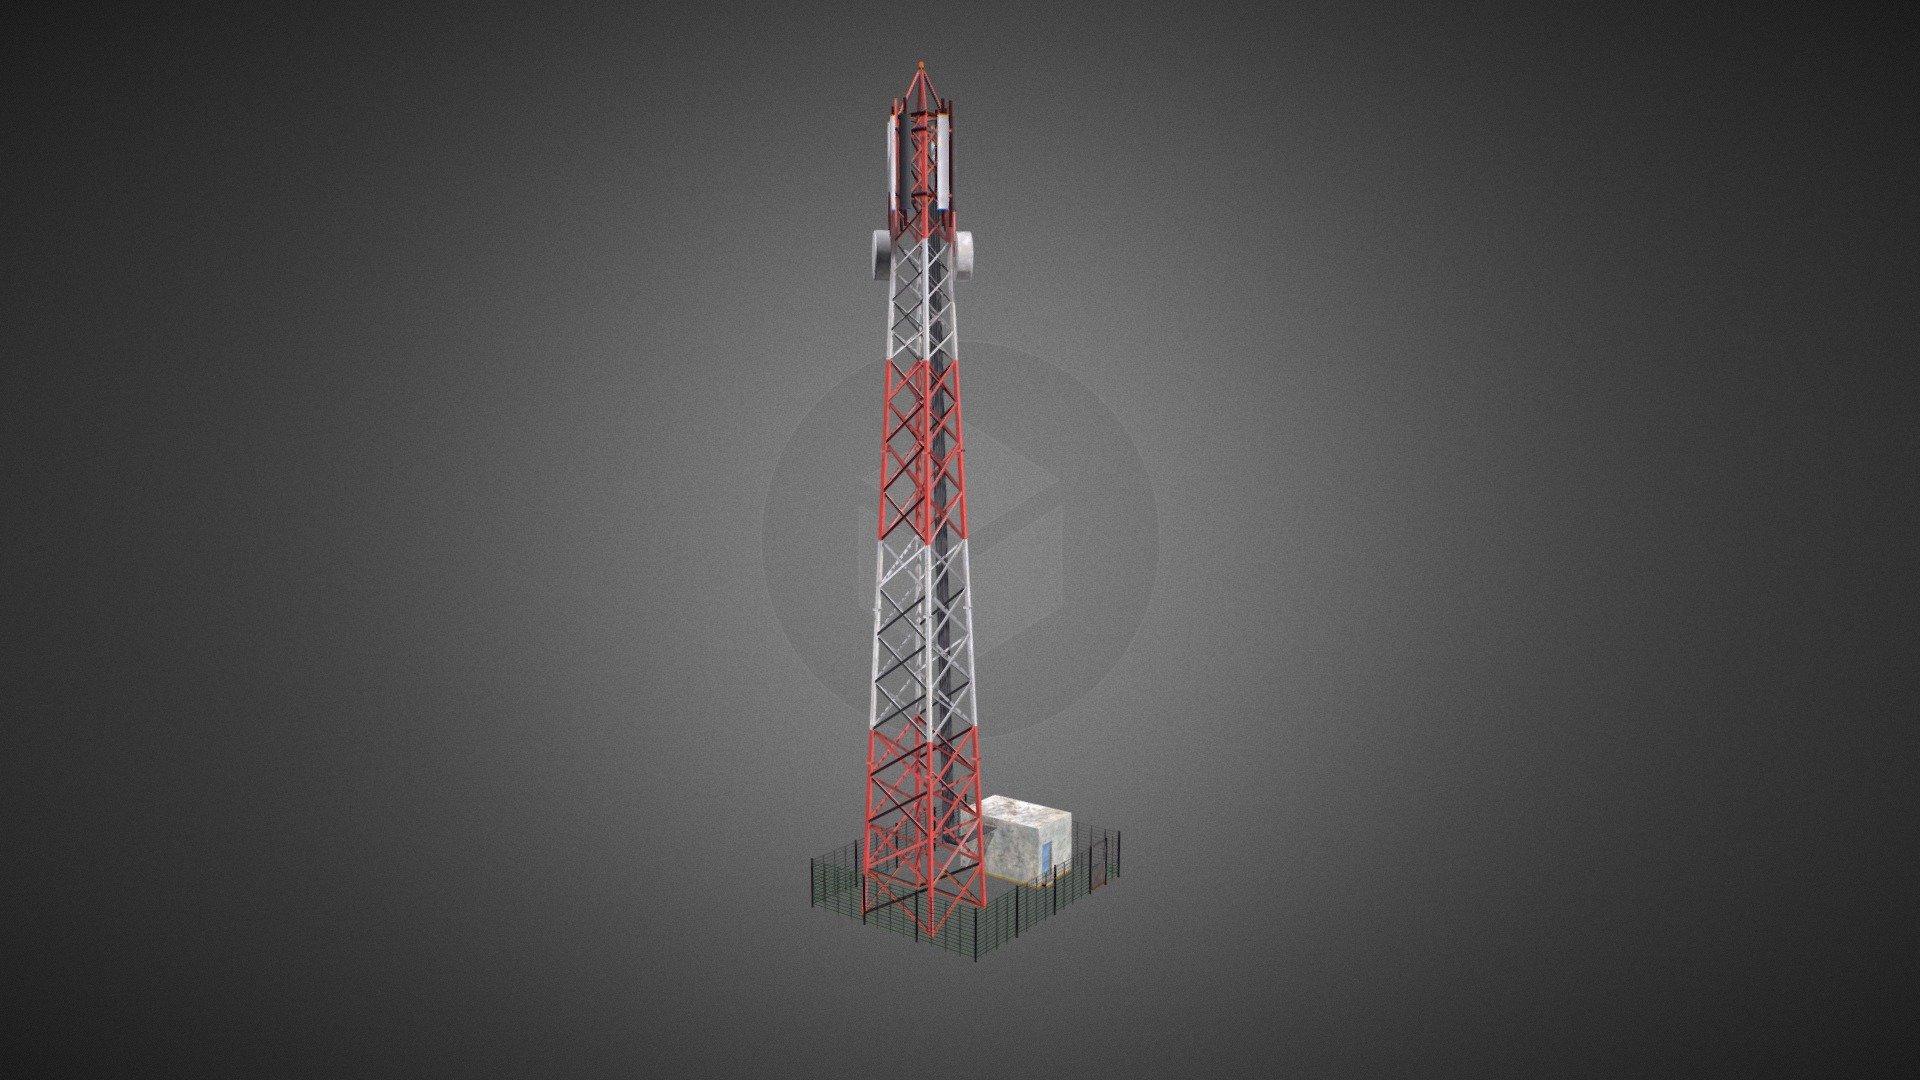 Low poly game-ready 3d model of a  Cell phone Tower for Virtual Reality (VR), Augmented Reality (AR), games and other real-time apps - Cell phone Tower - Buy Royalty Free 3D model by CG Duck (@cg_duck) 3d model